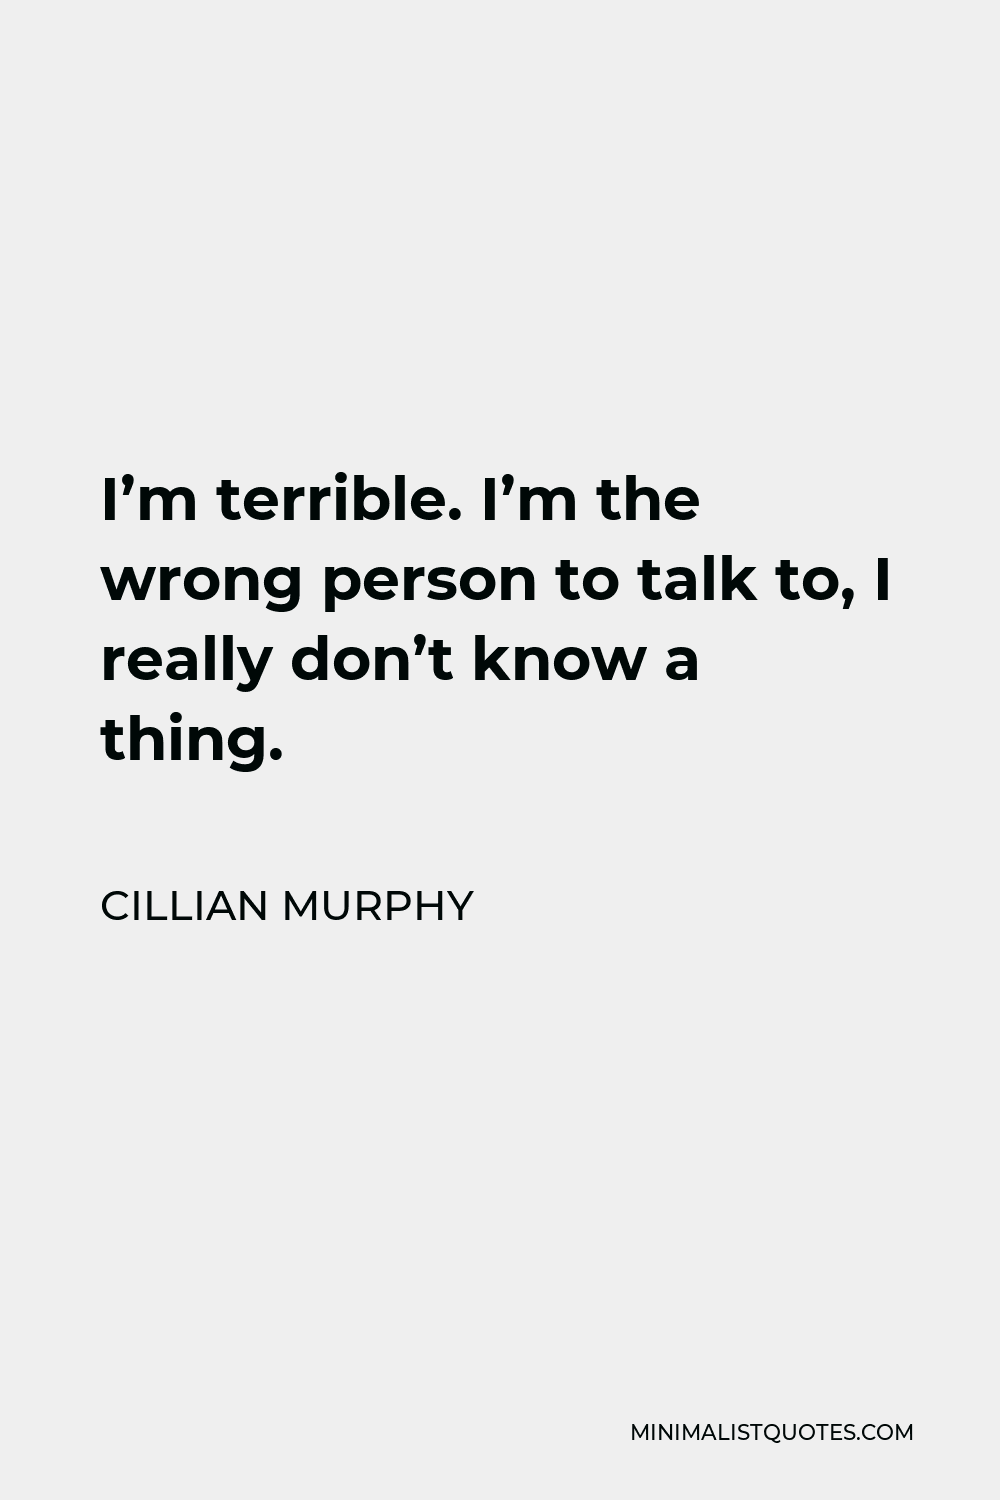 Cillian Murphy Quote - I’m terrible. I’m the wrong person to talk to, I really don’t know a thing.